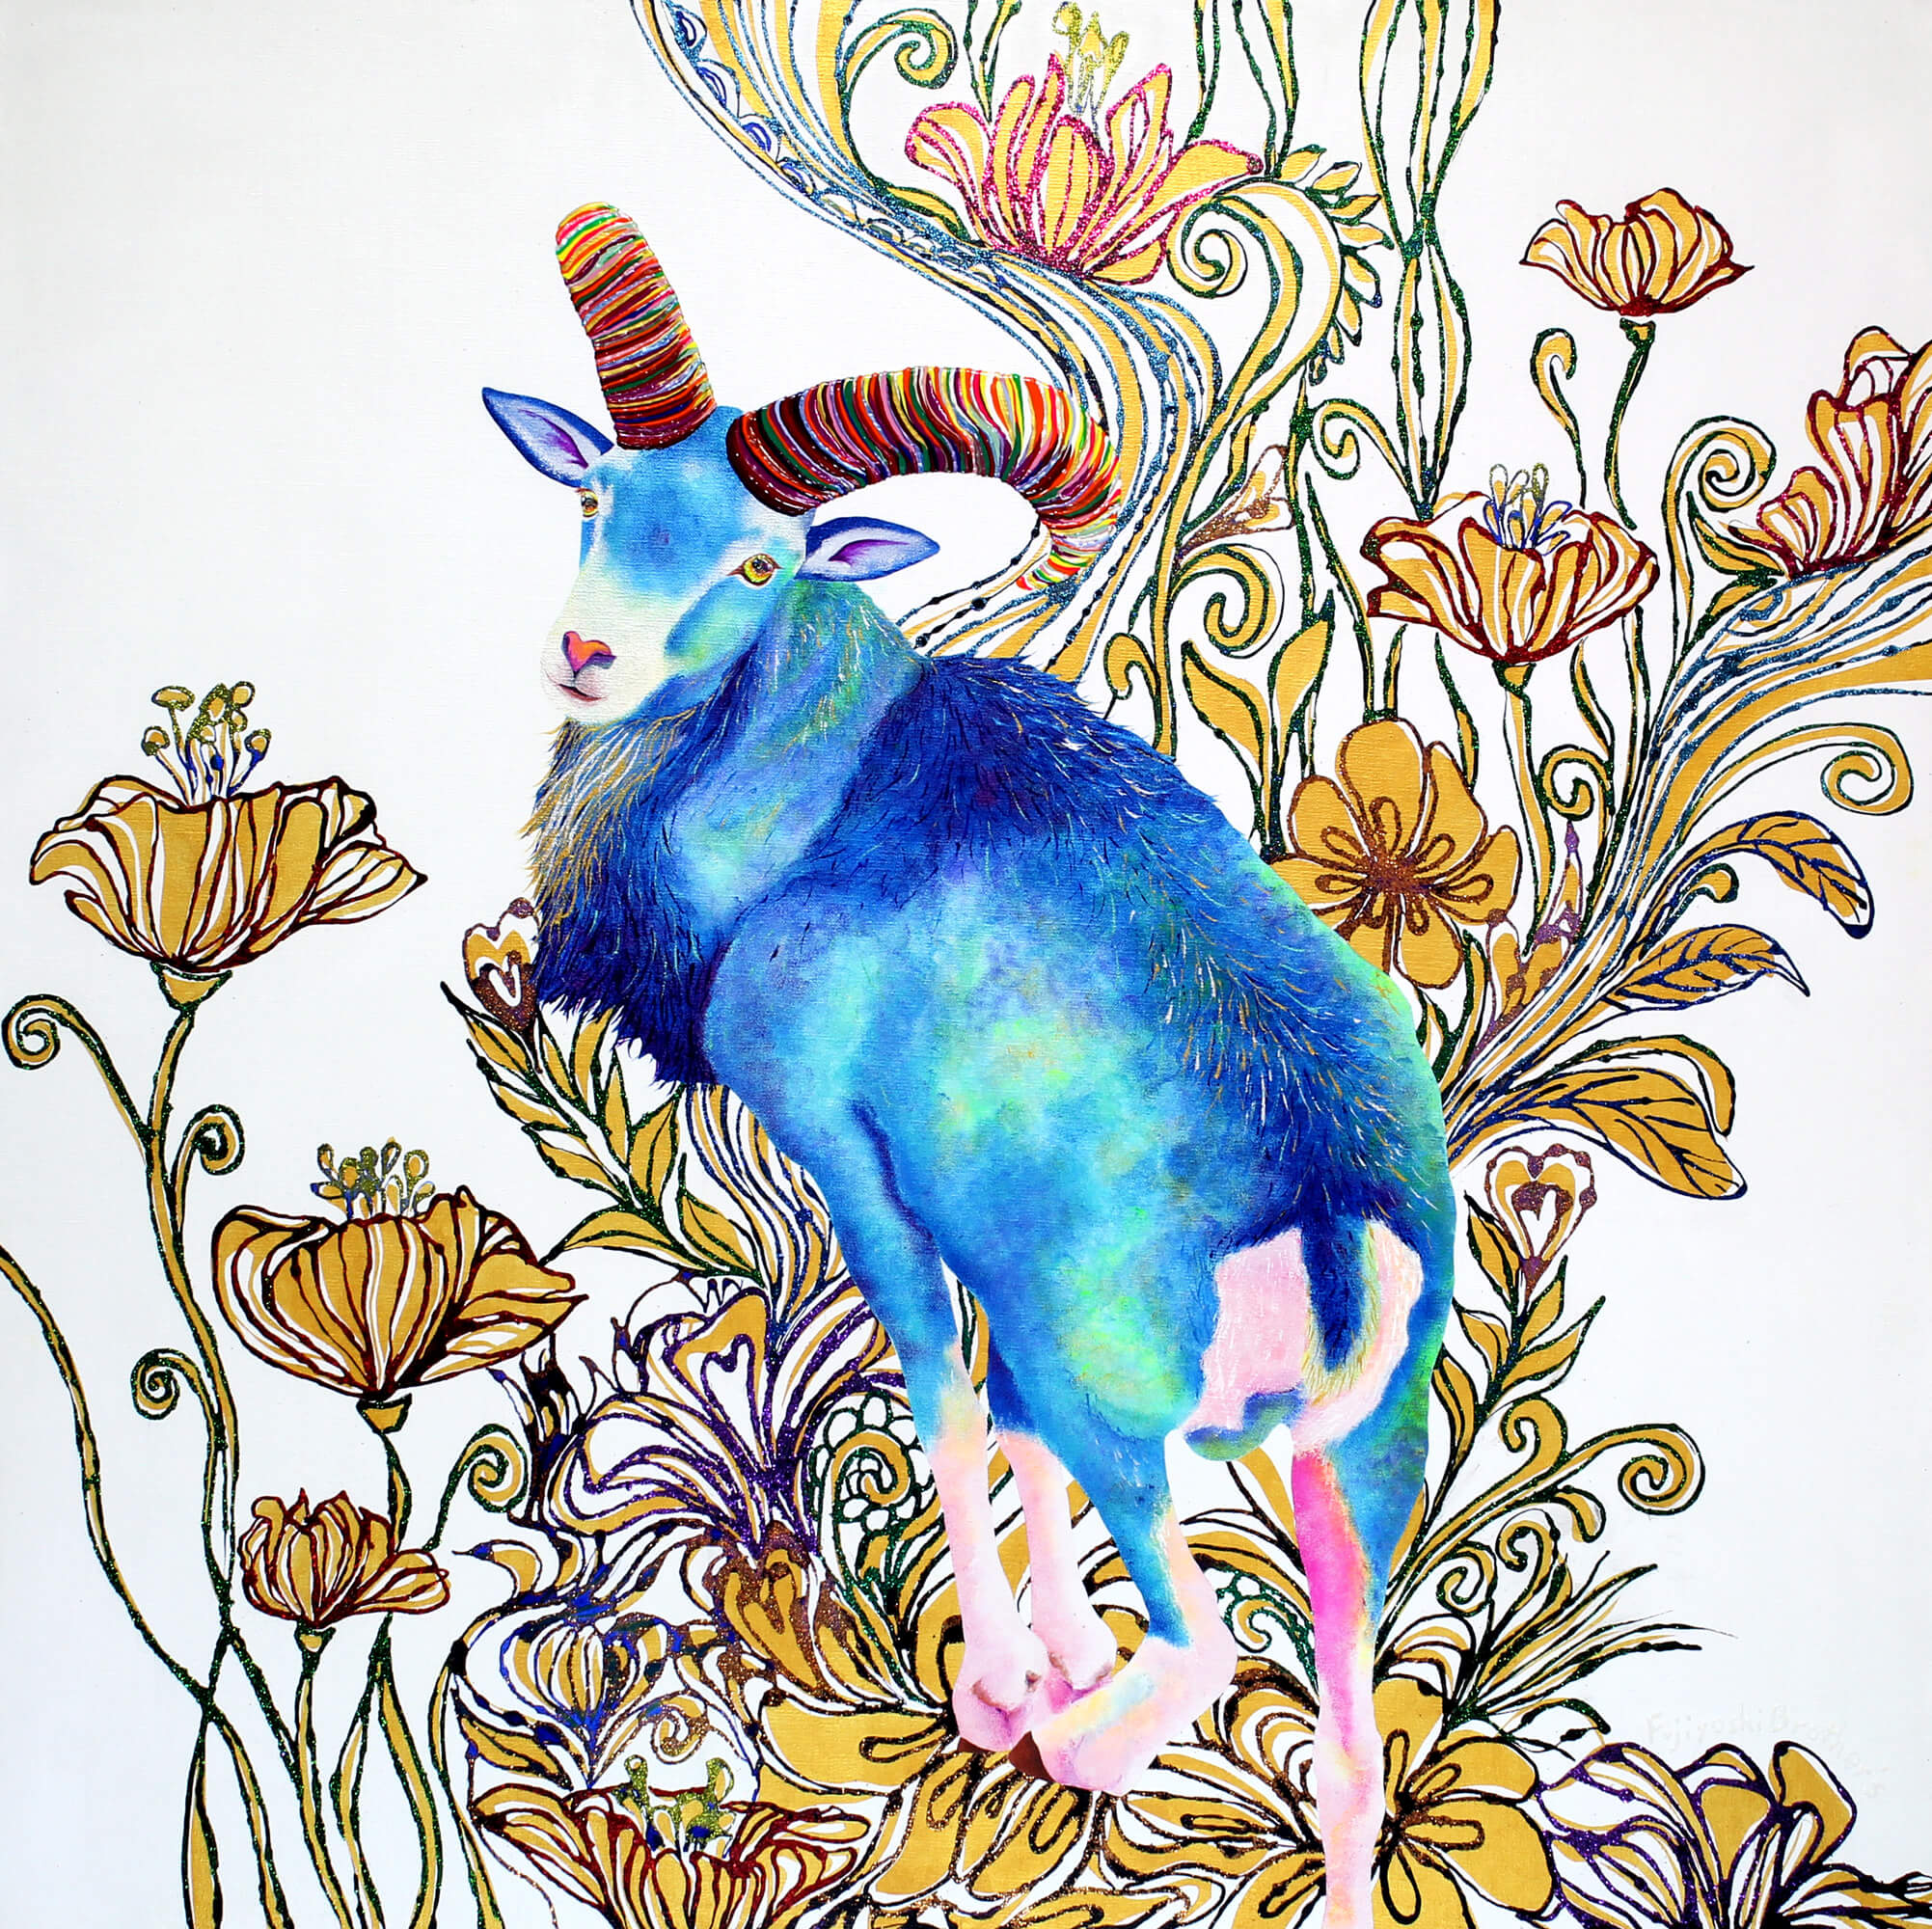 Blue-Mouflon-＆-Gold-Flowers改行
Acrylic glitter and ink on canvas, 910×910mm, 2015